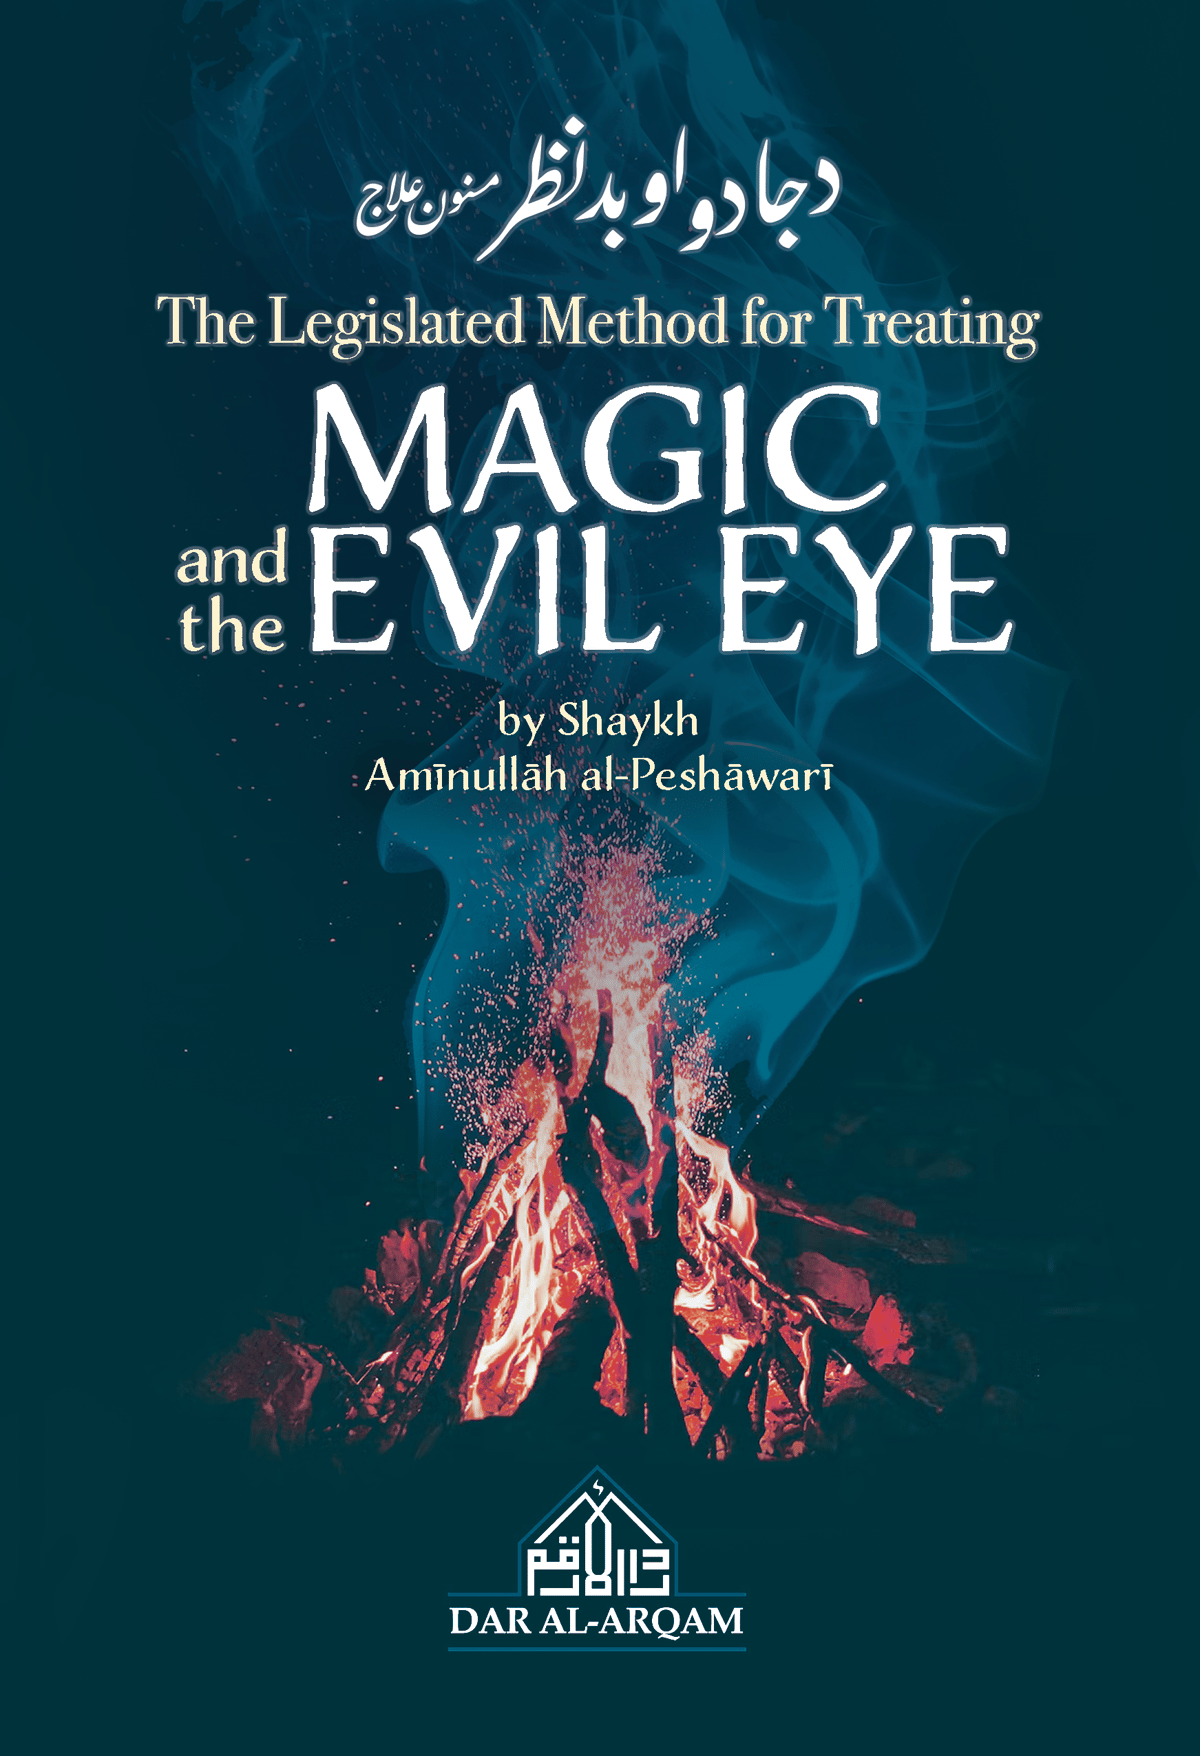 Image of The Legislated Method For Treating Magic and the Evil Eye